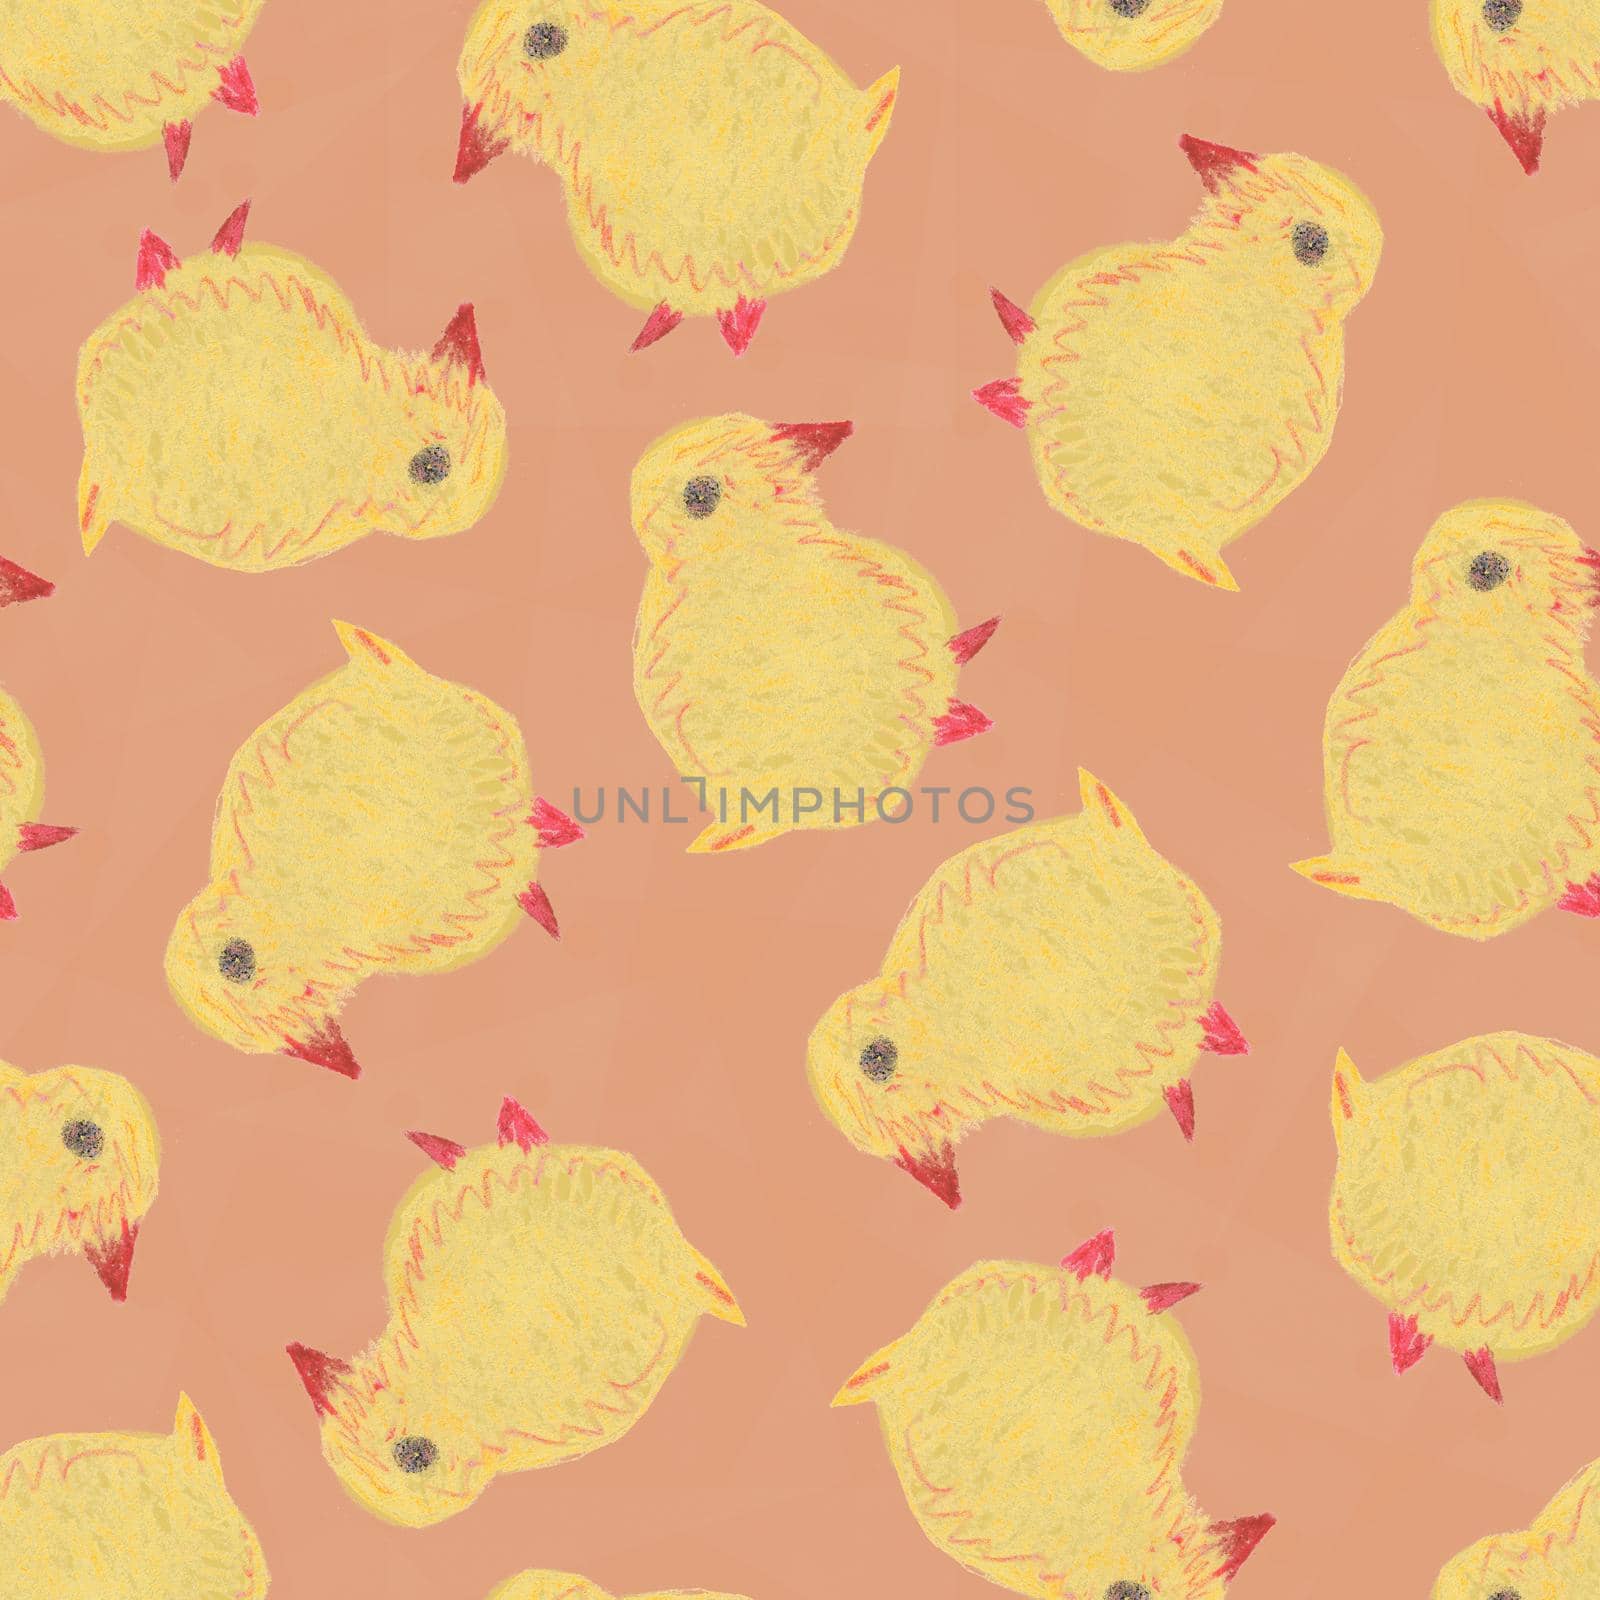 Cute Cartoon Hand Drawn Seamless Pattern With Little Yellow Chick. Funny Easter Watercolor Chicken on Pink Background.